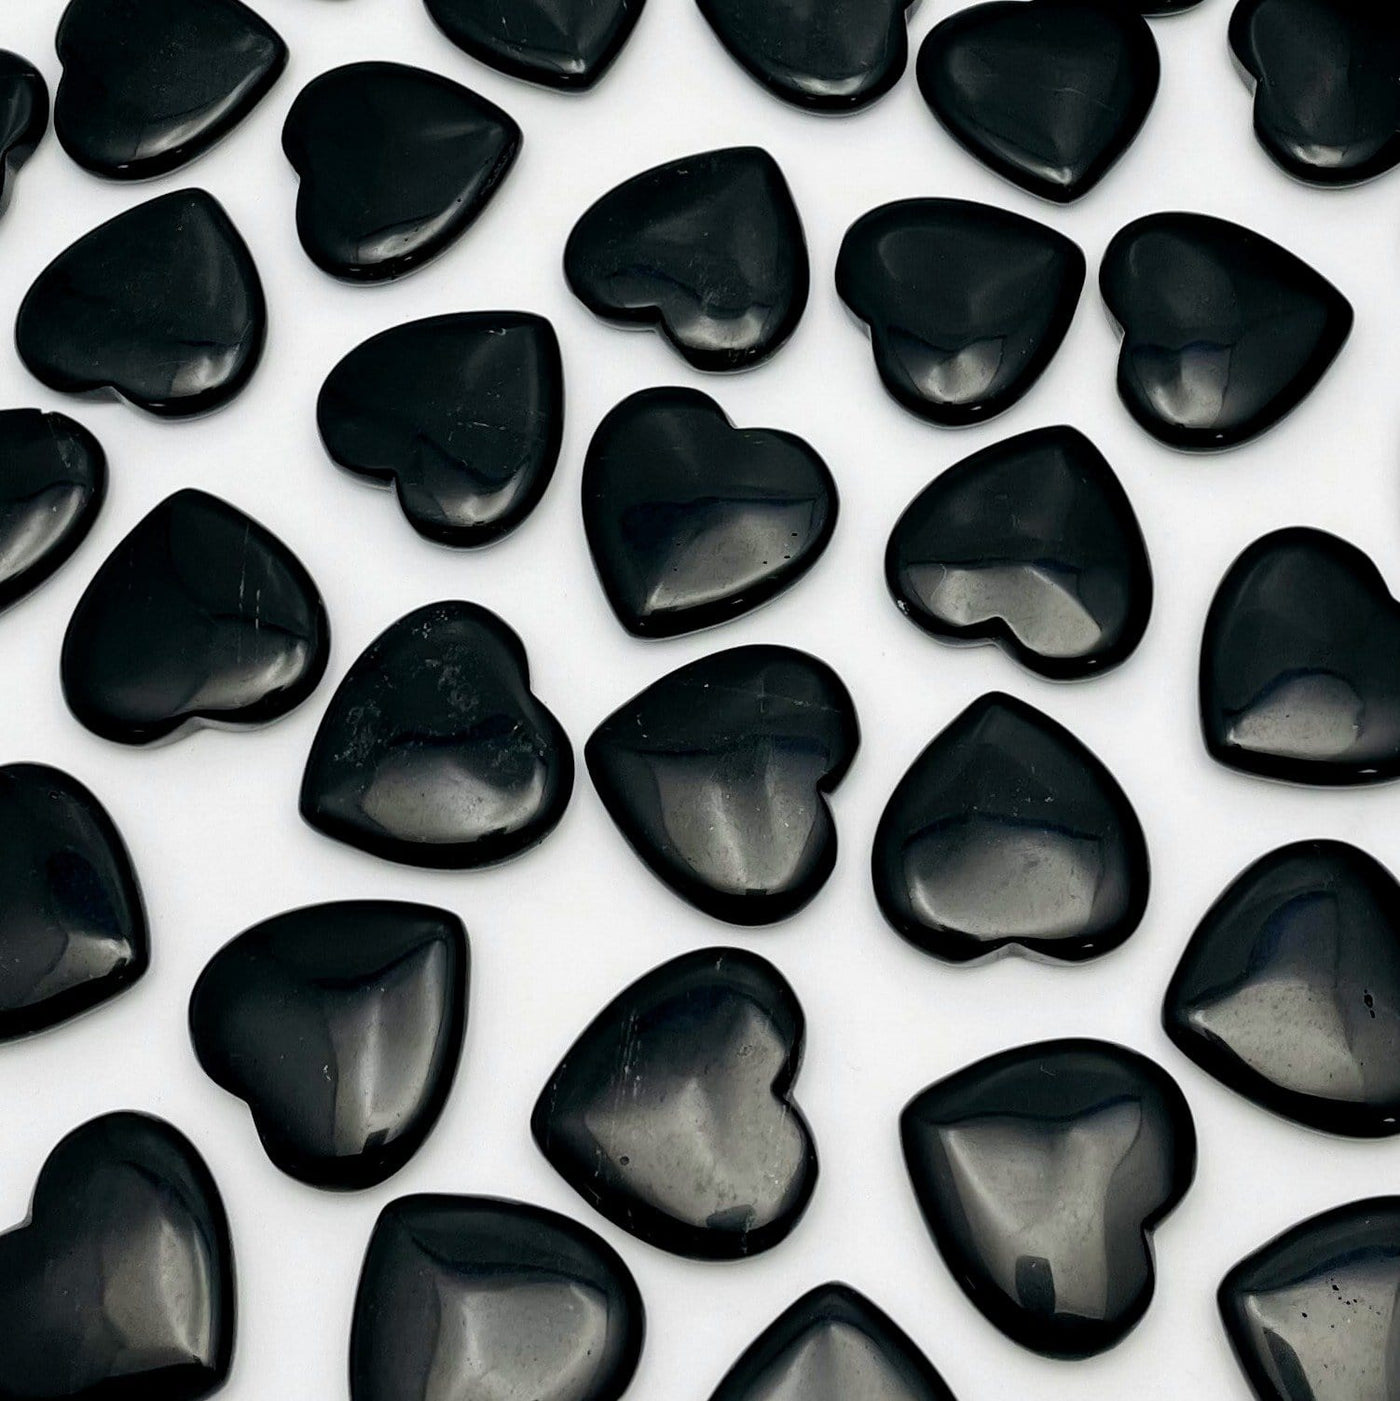 Black Obsidian Hearts scattered on white background